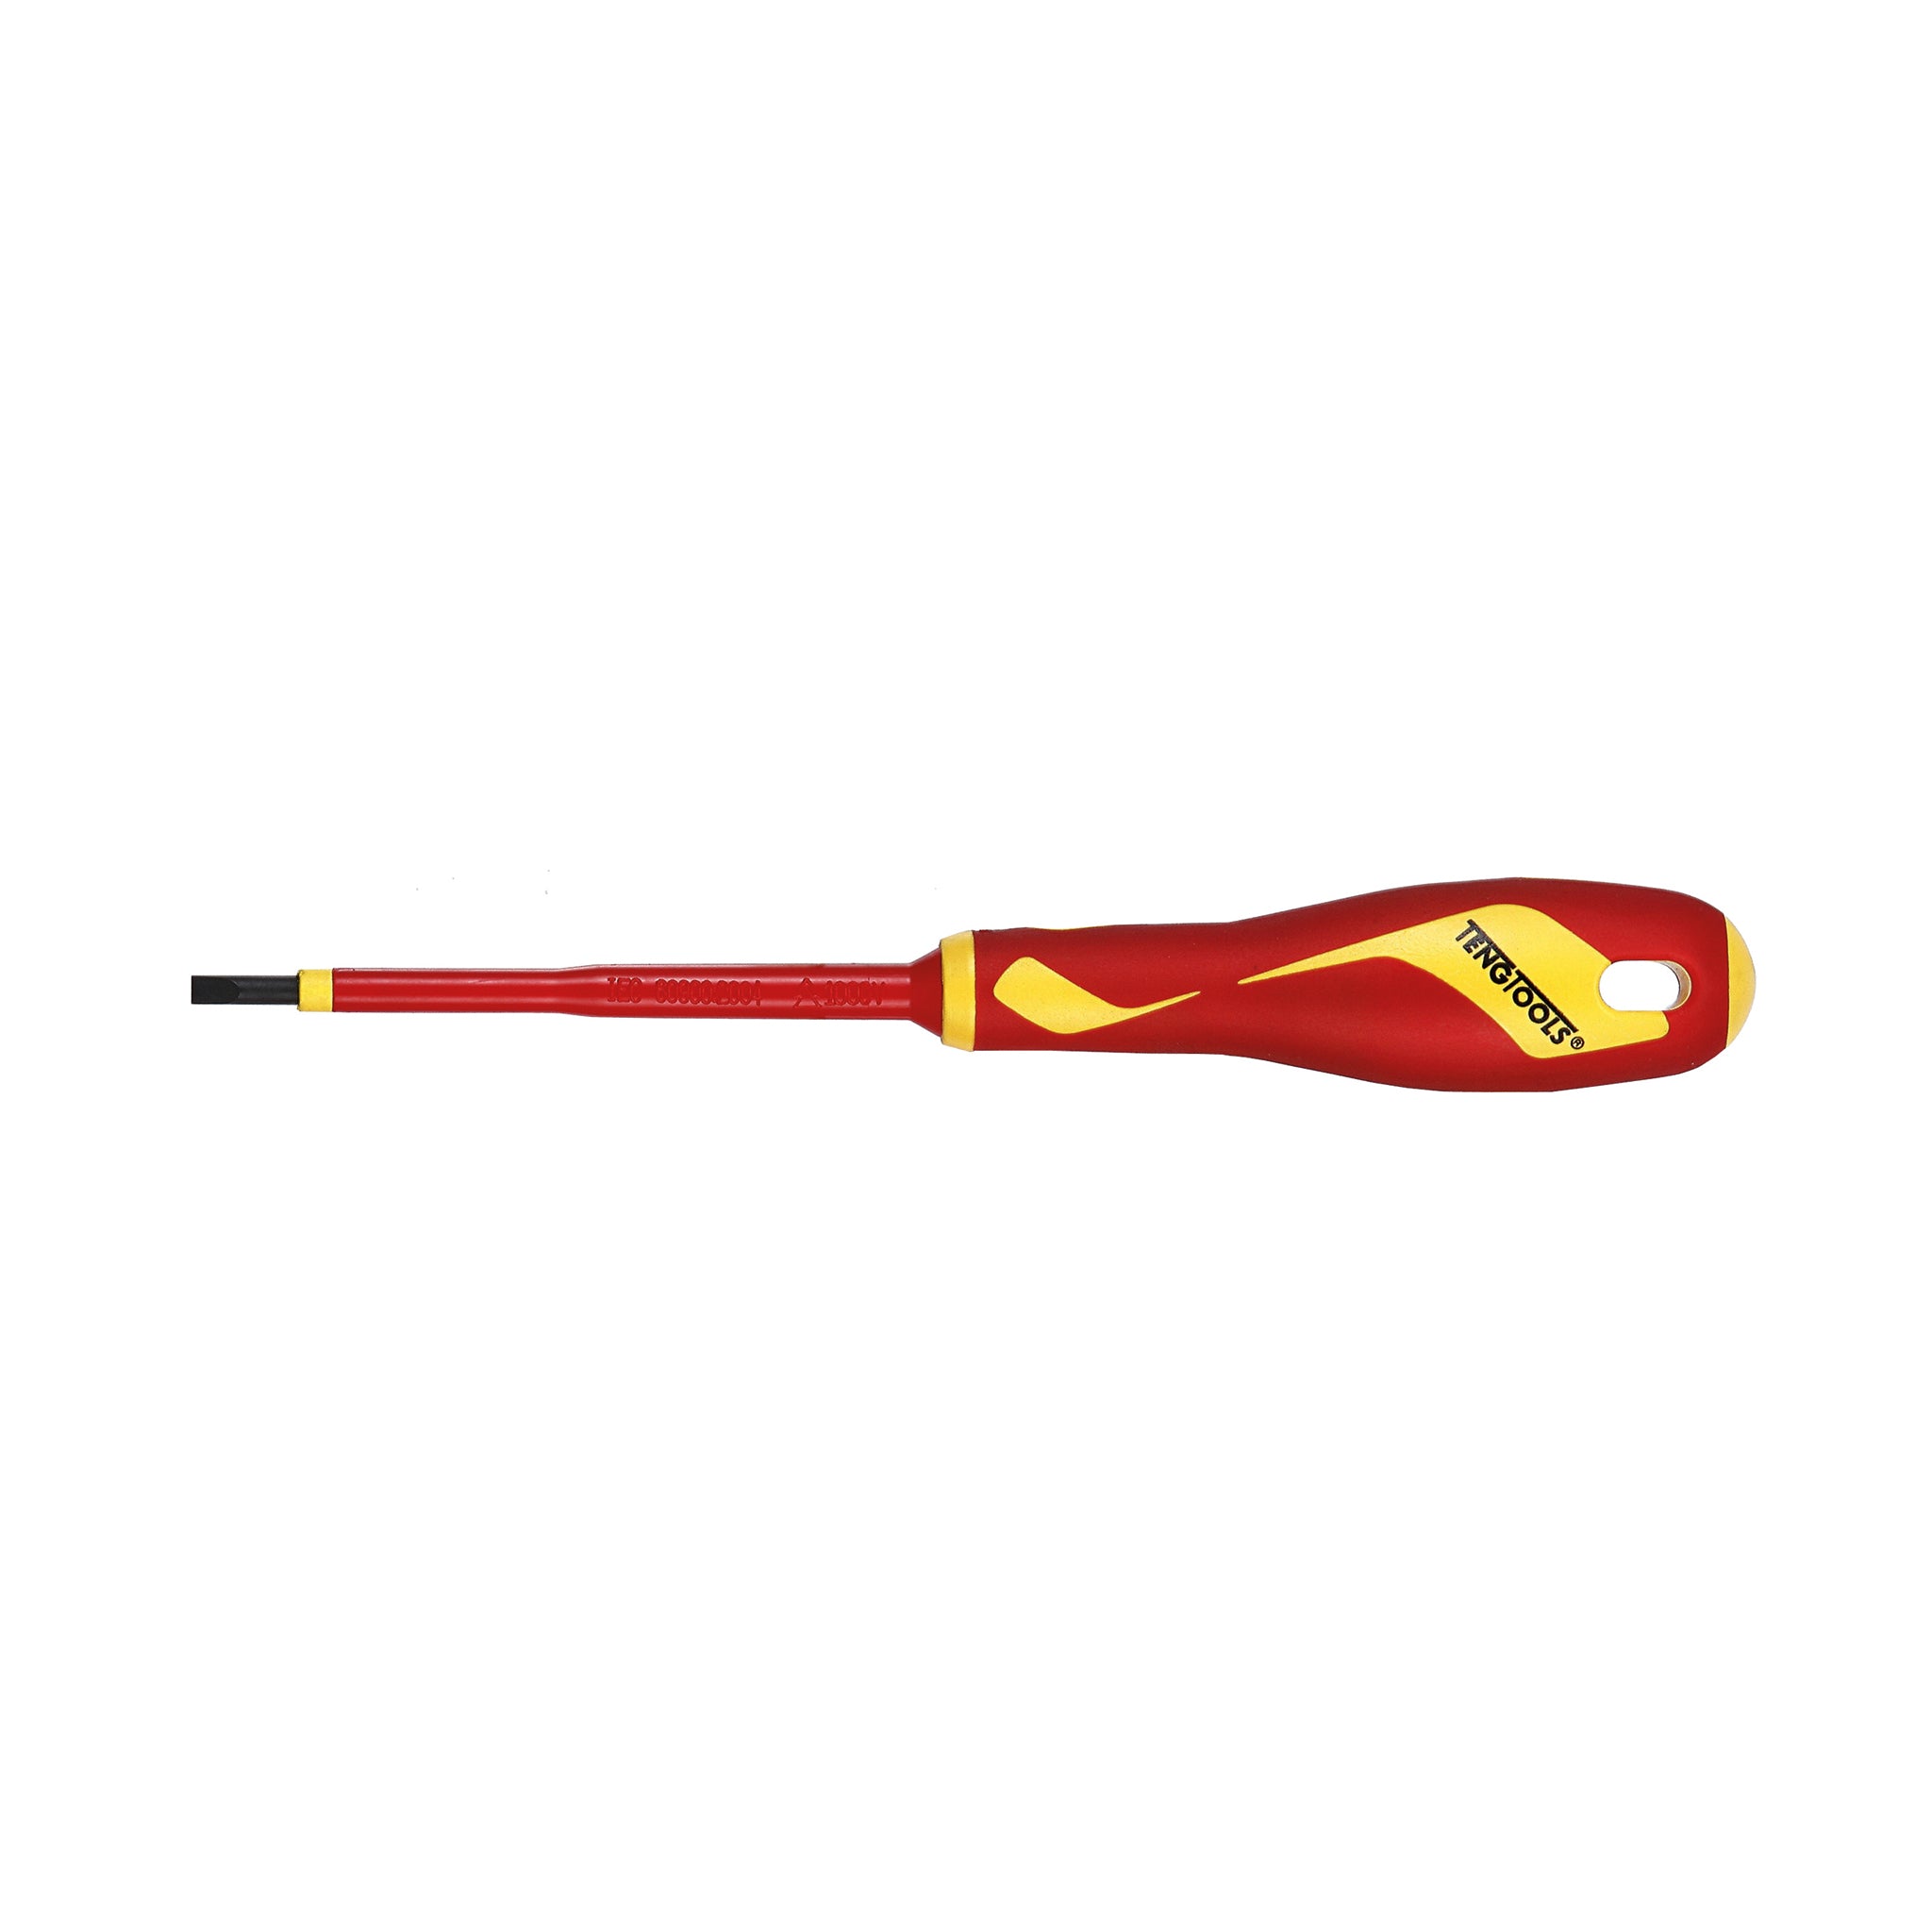 Insulated Flat Slotted Head 1000 Volt VDE Individually Tested And Certified Screwdrivers - 0.5x3.0x100MM